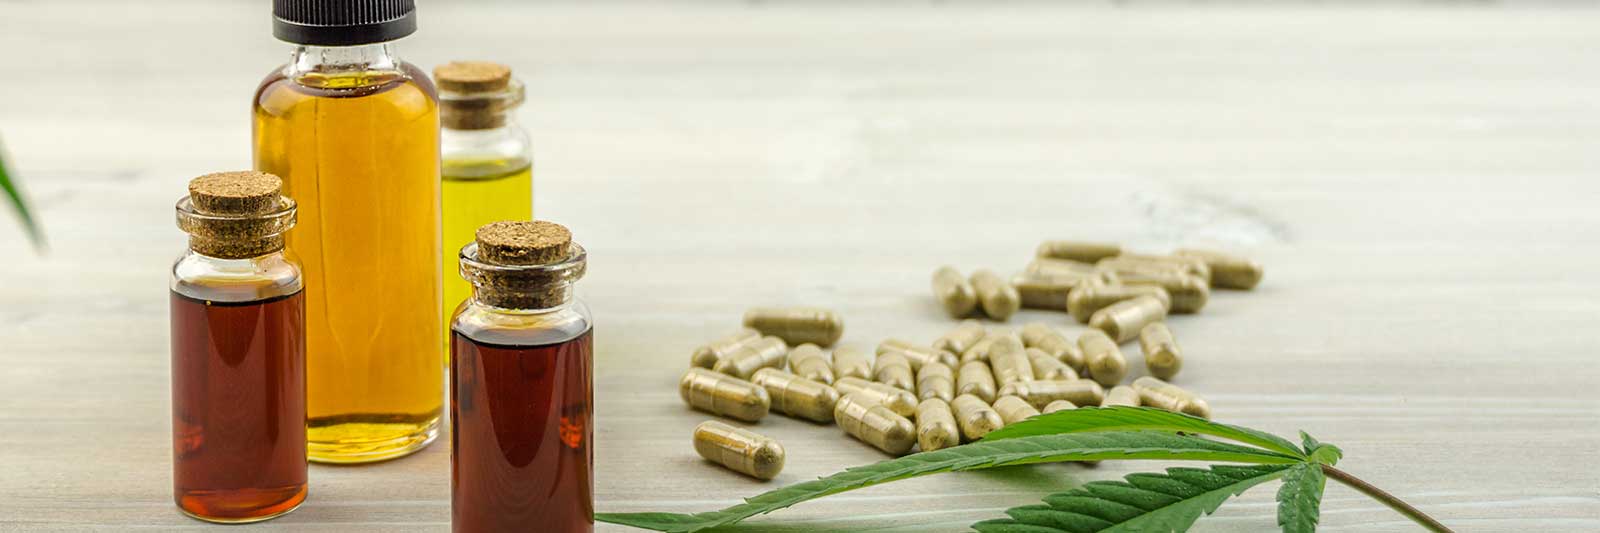 CBD Oil Uses, Benefits, Dosage Guidelines and Side Effects